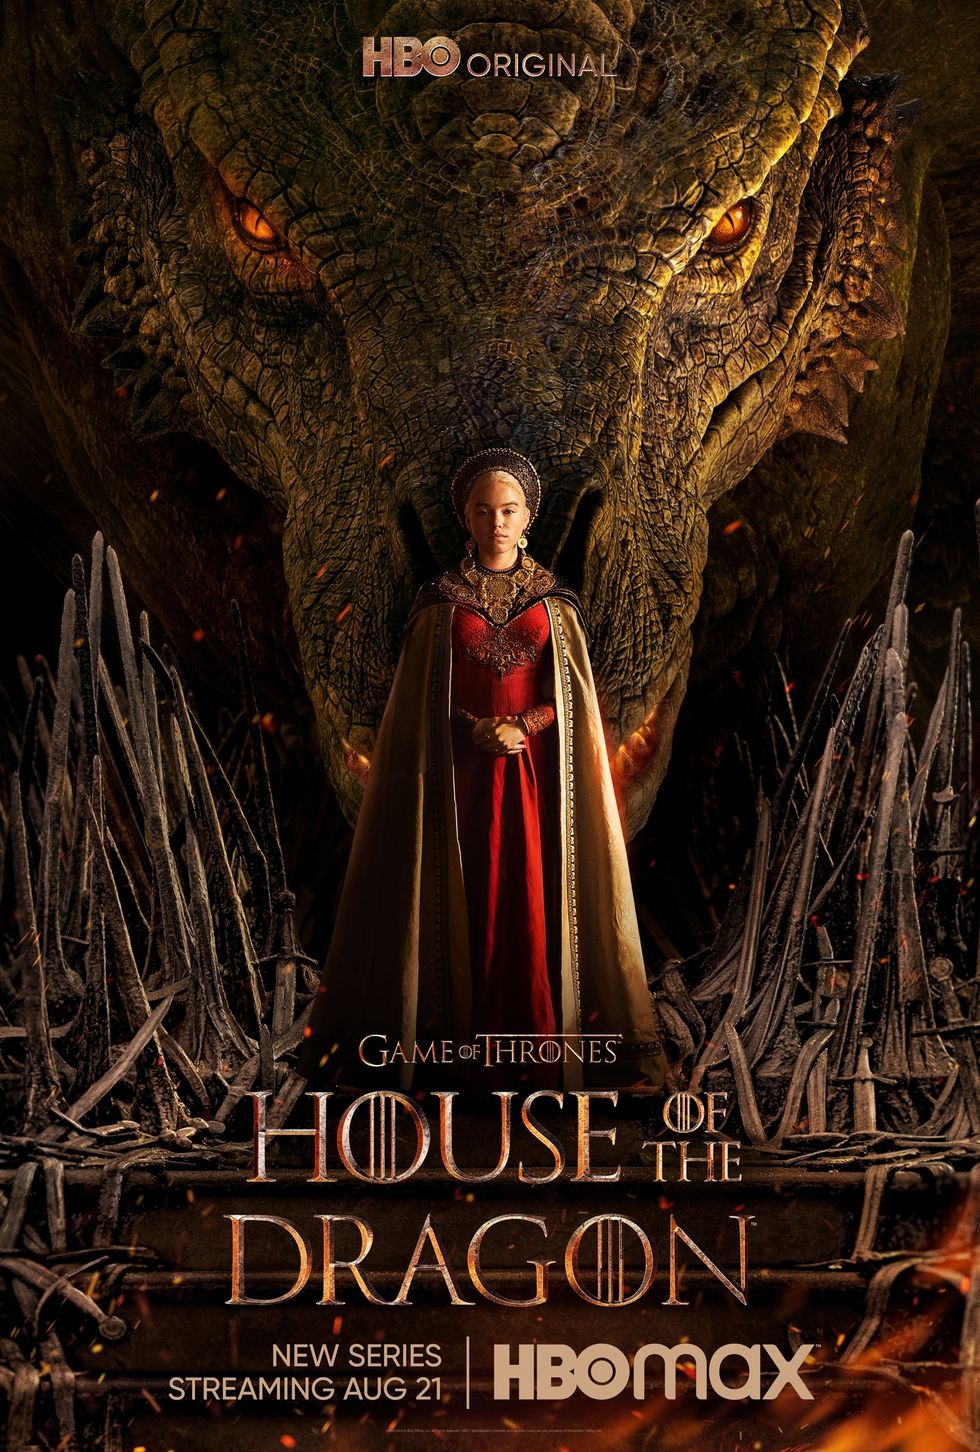 HBO's House of the Dragon Season 2: Plot, cast, release date, and more